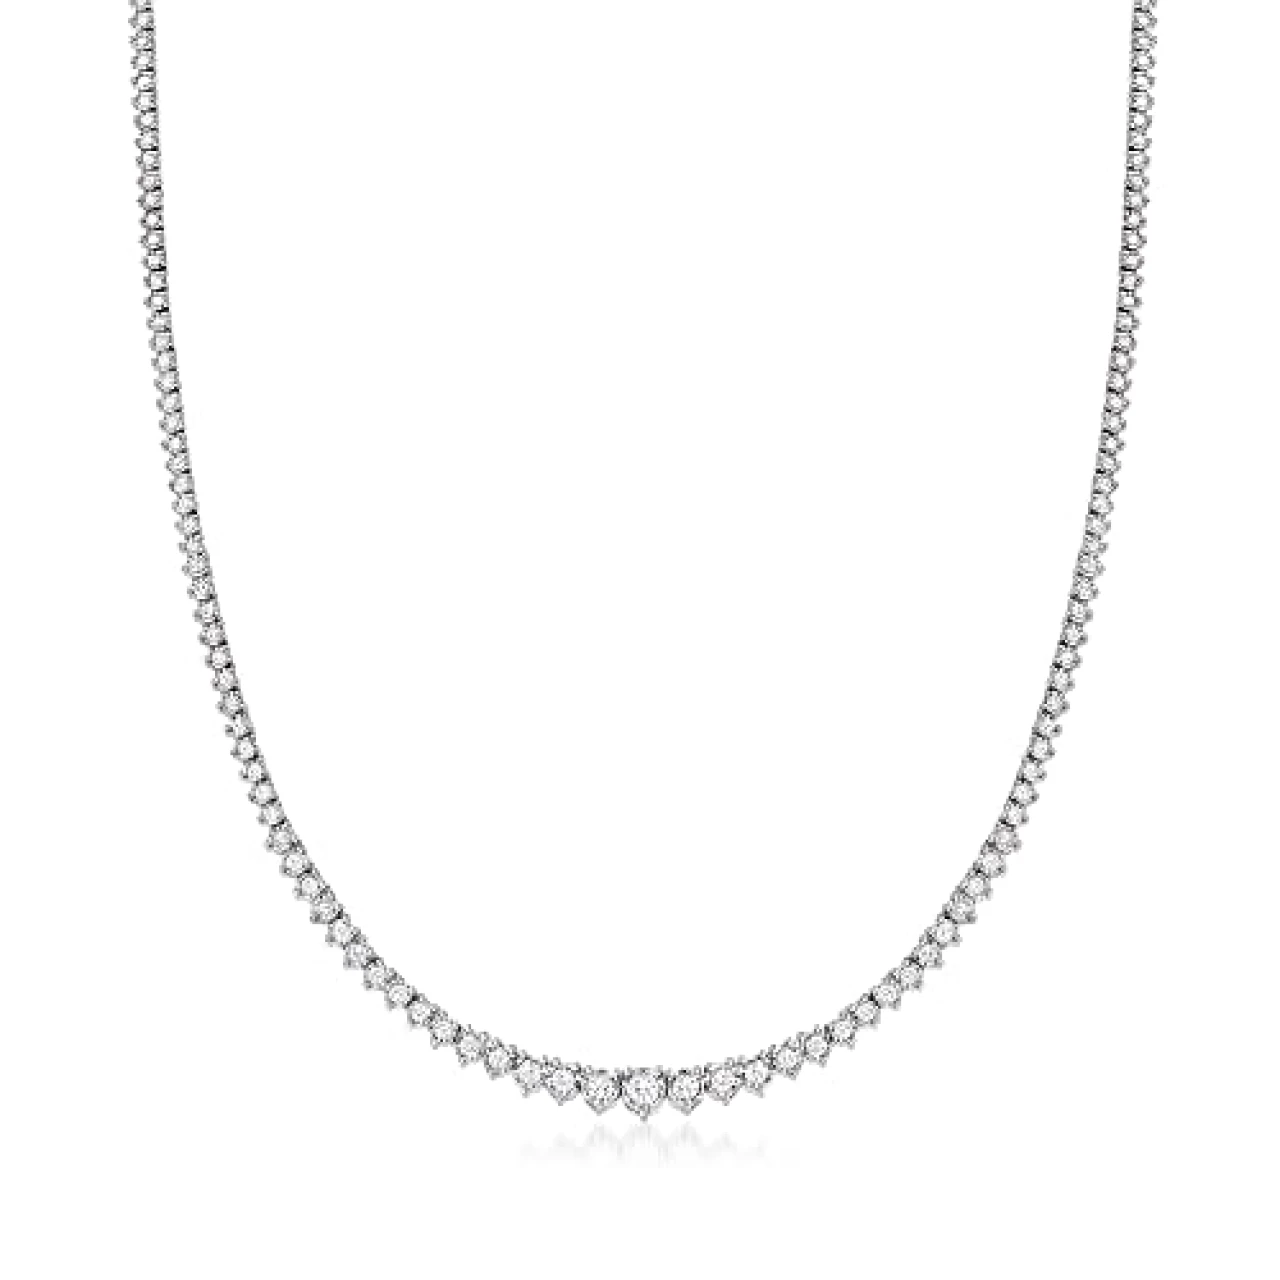 Ross-Simons 3.00 ct. t.w. Diamond Tennis Necklace in Sterling Silver. 20 inches